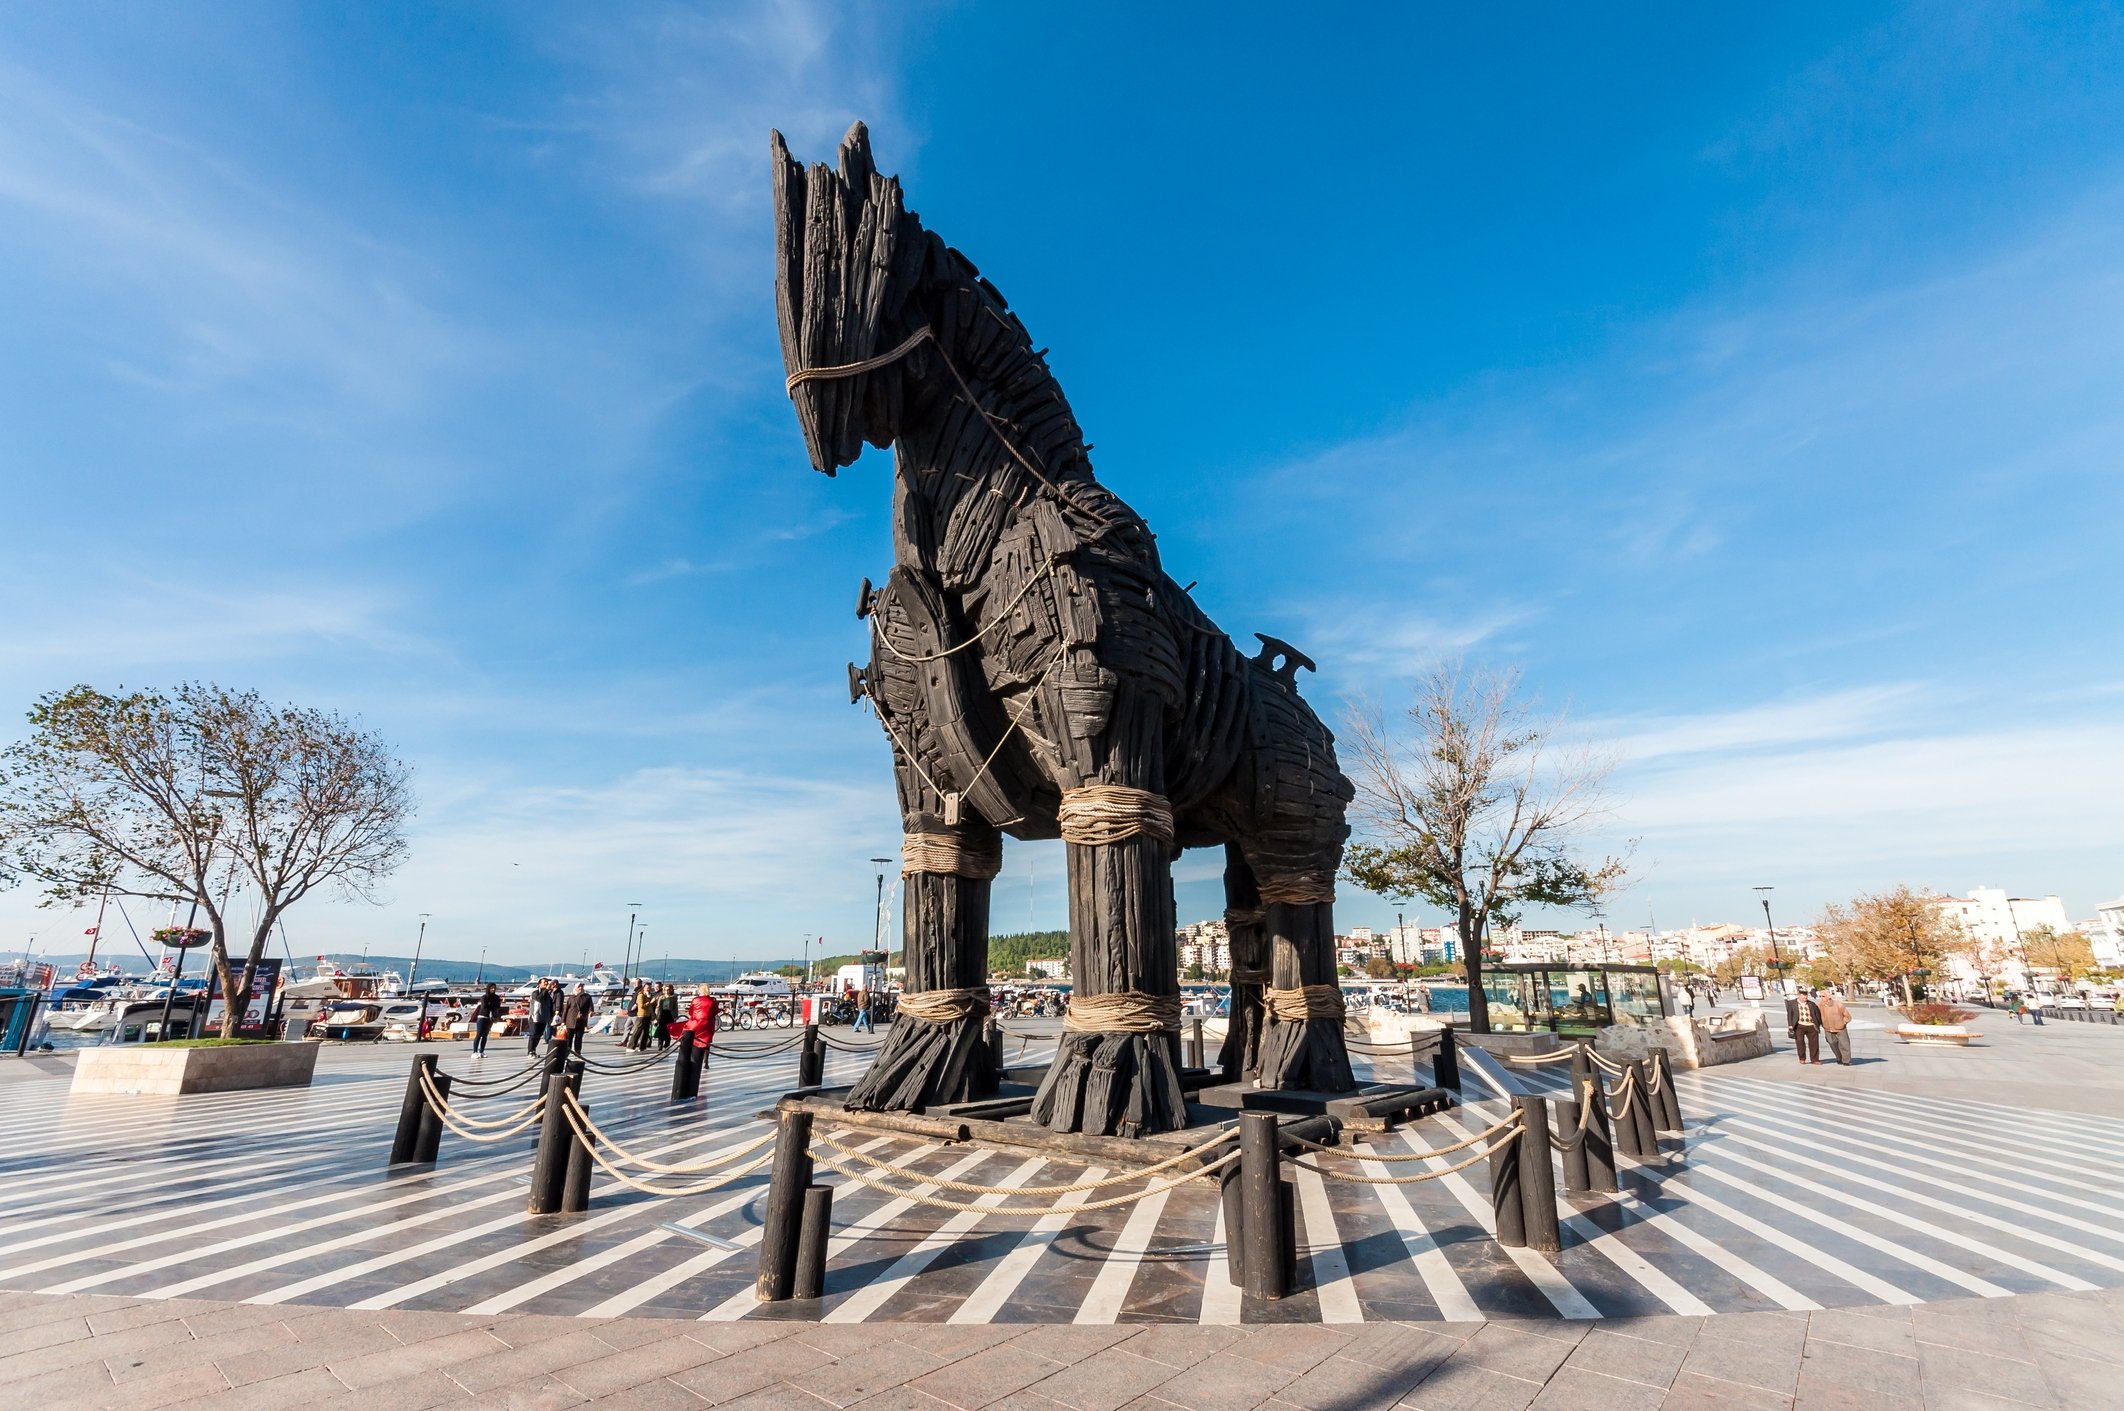 After the filming of the movie Troy, the wooden horse that was used as a prop was donated to the city of Çanakkale. (iStock Photo)